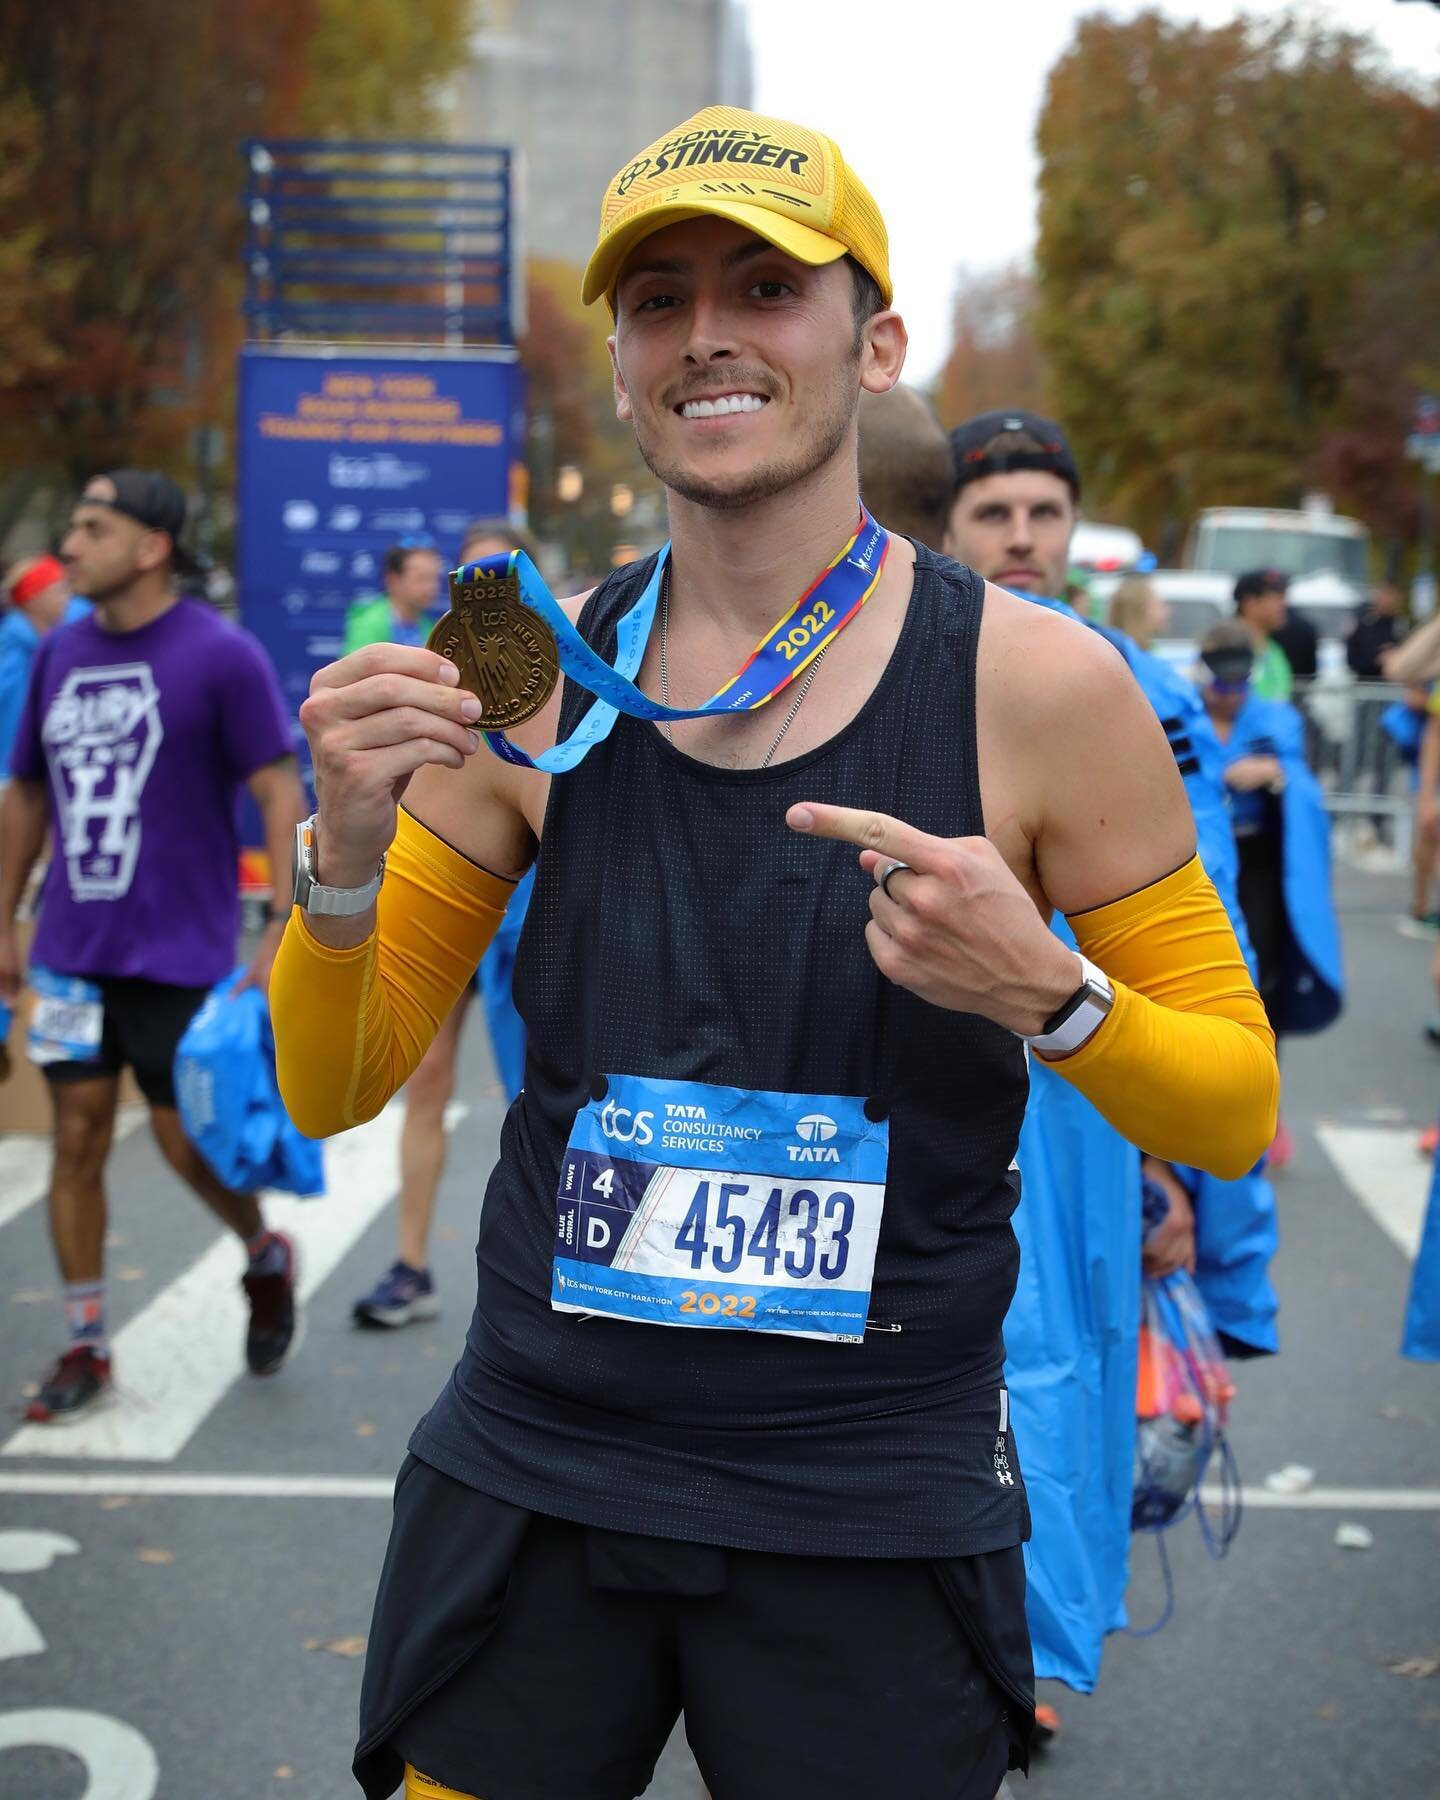 4/4 @nycmarathon marathon recap!

Crossing the finish was incredibly fulfilling and being awarded my finisher medal was fantastic. It&rsquo;s phenomenal how heavy they are!

After the race, finishers needed to make their way through a series of check